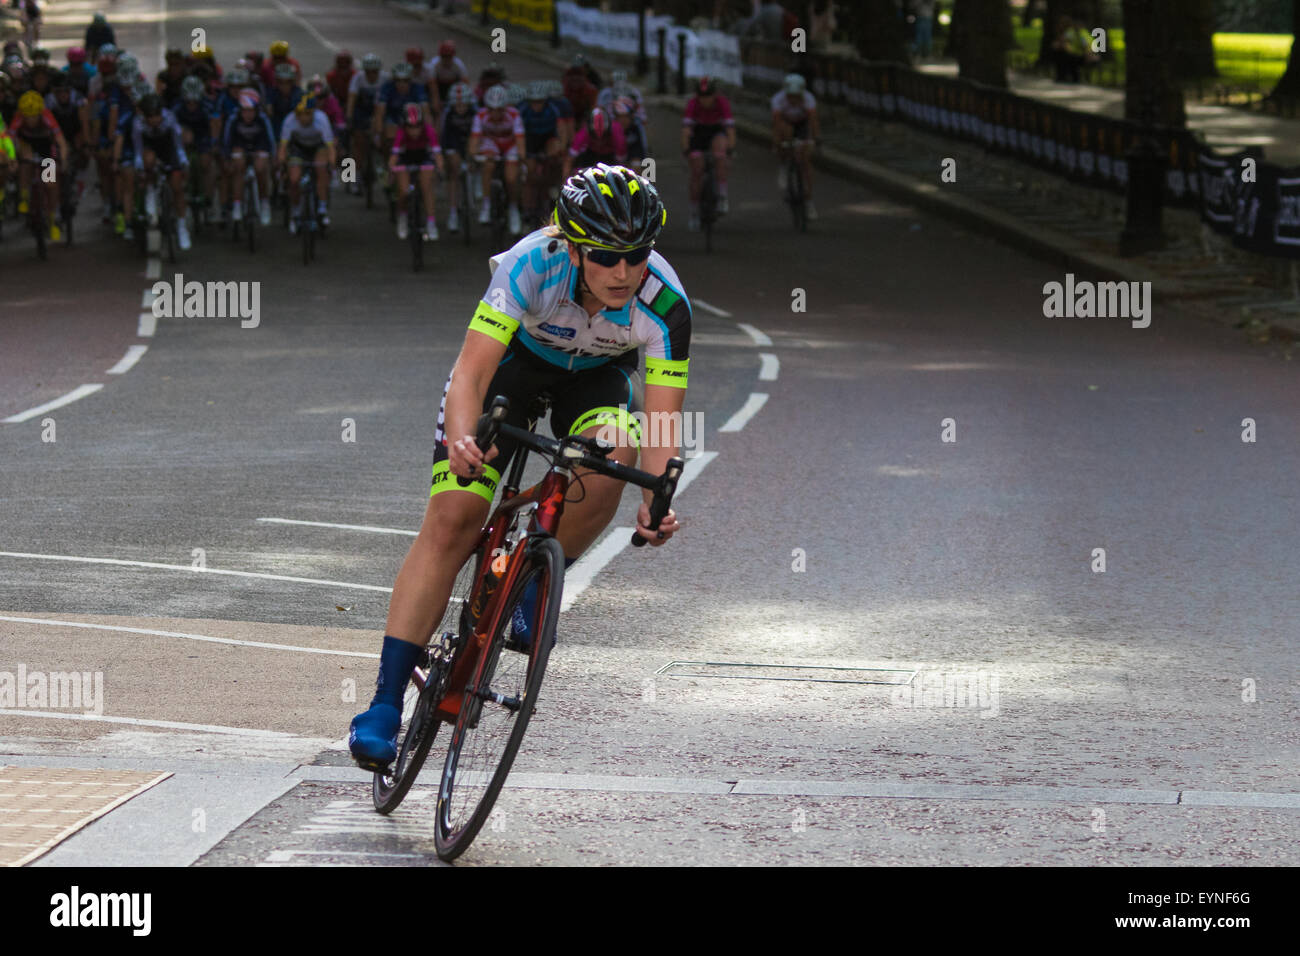 Westminster, Londra, 1 agosto 2015. Top donne ciclisti competere nel Prudential Ride London Grand Prix intorno a St James Park. Foto Stock